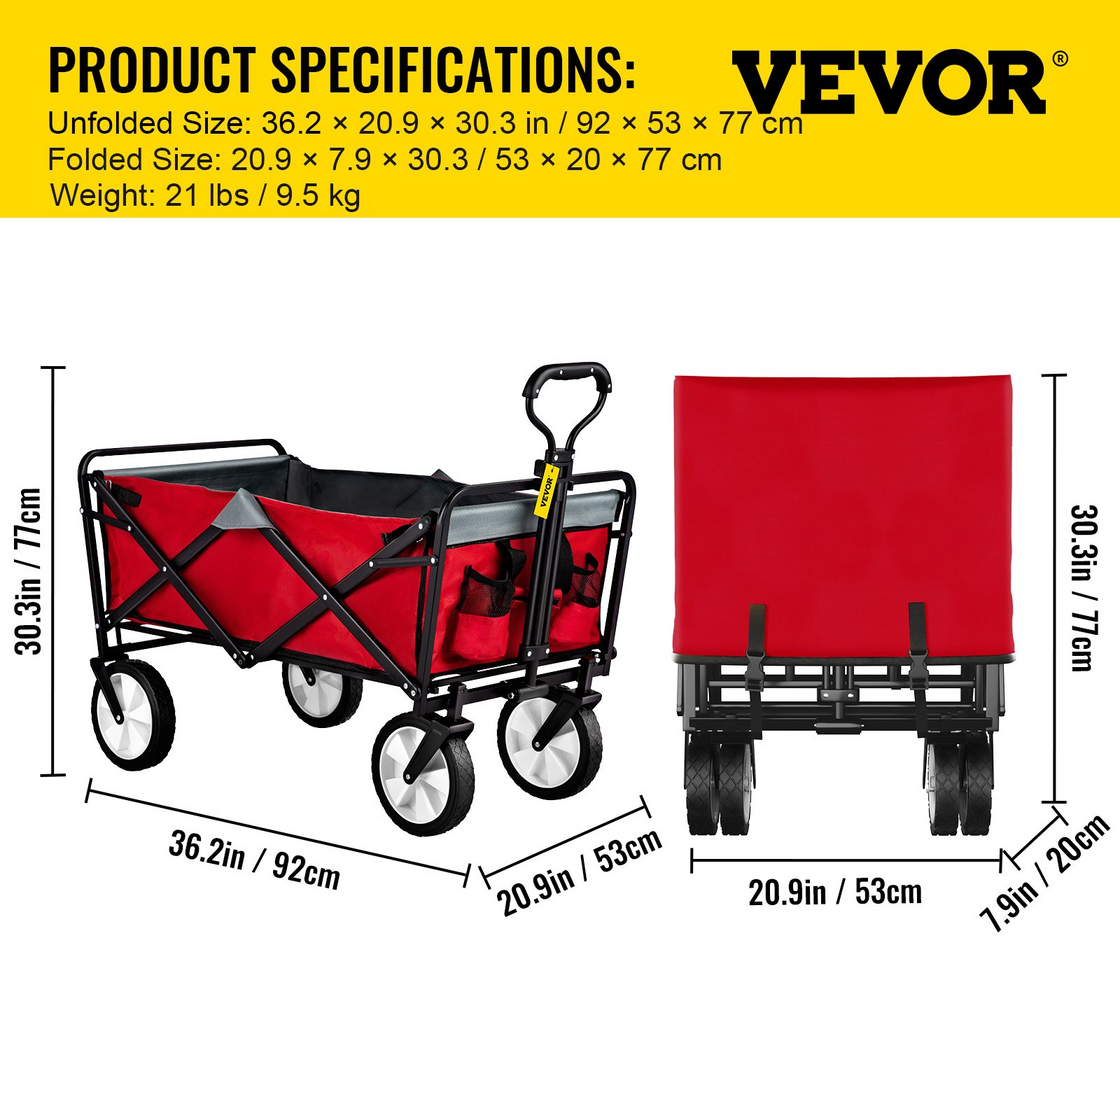 VEVOR Wagon Cart - Collapsible Folding Cart with 176lbs Load